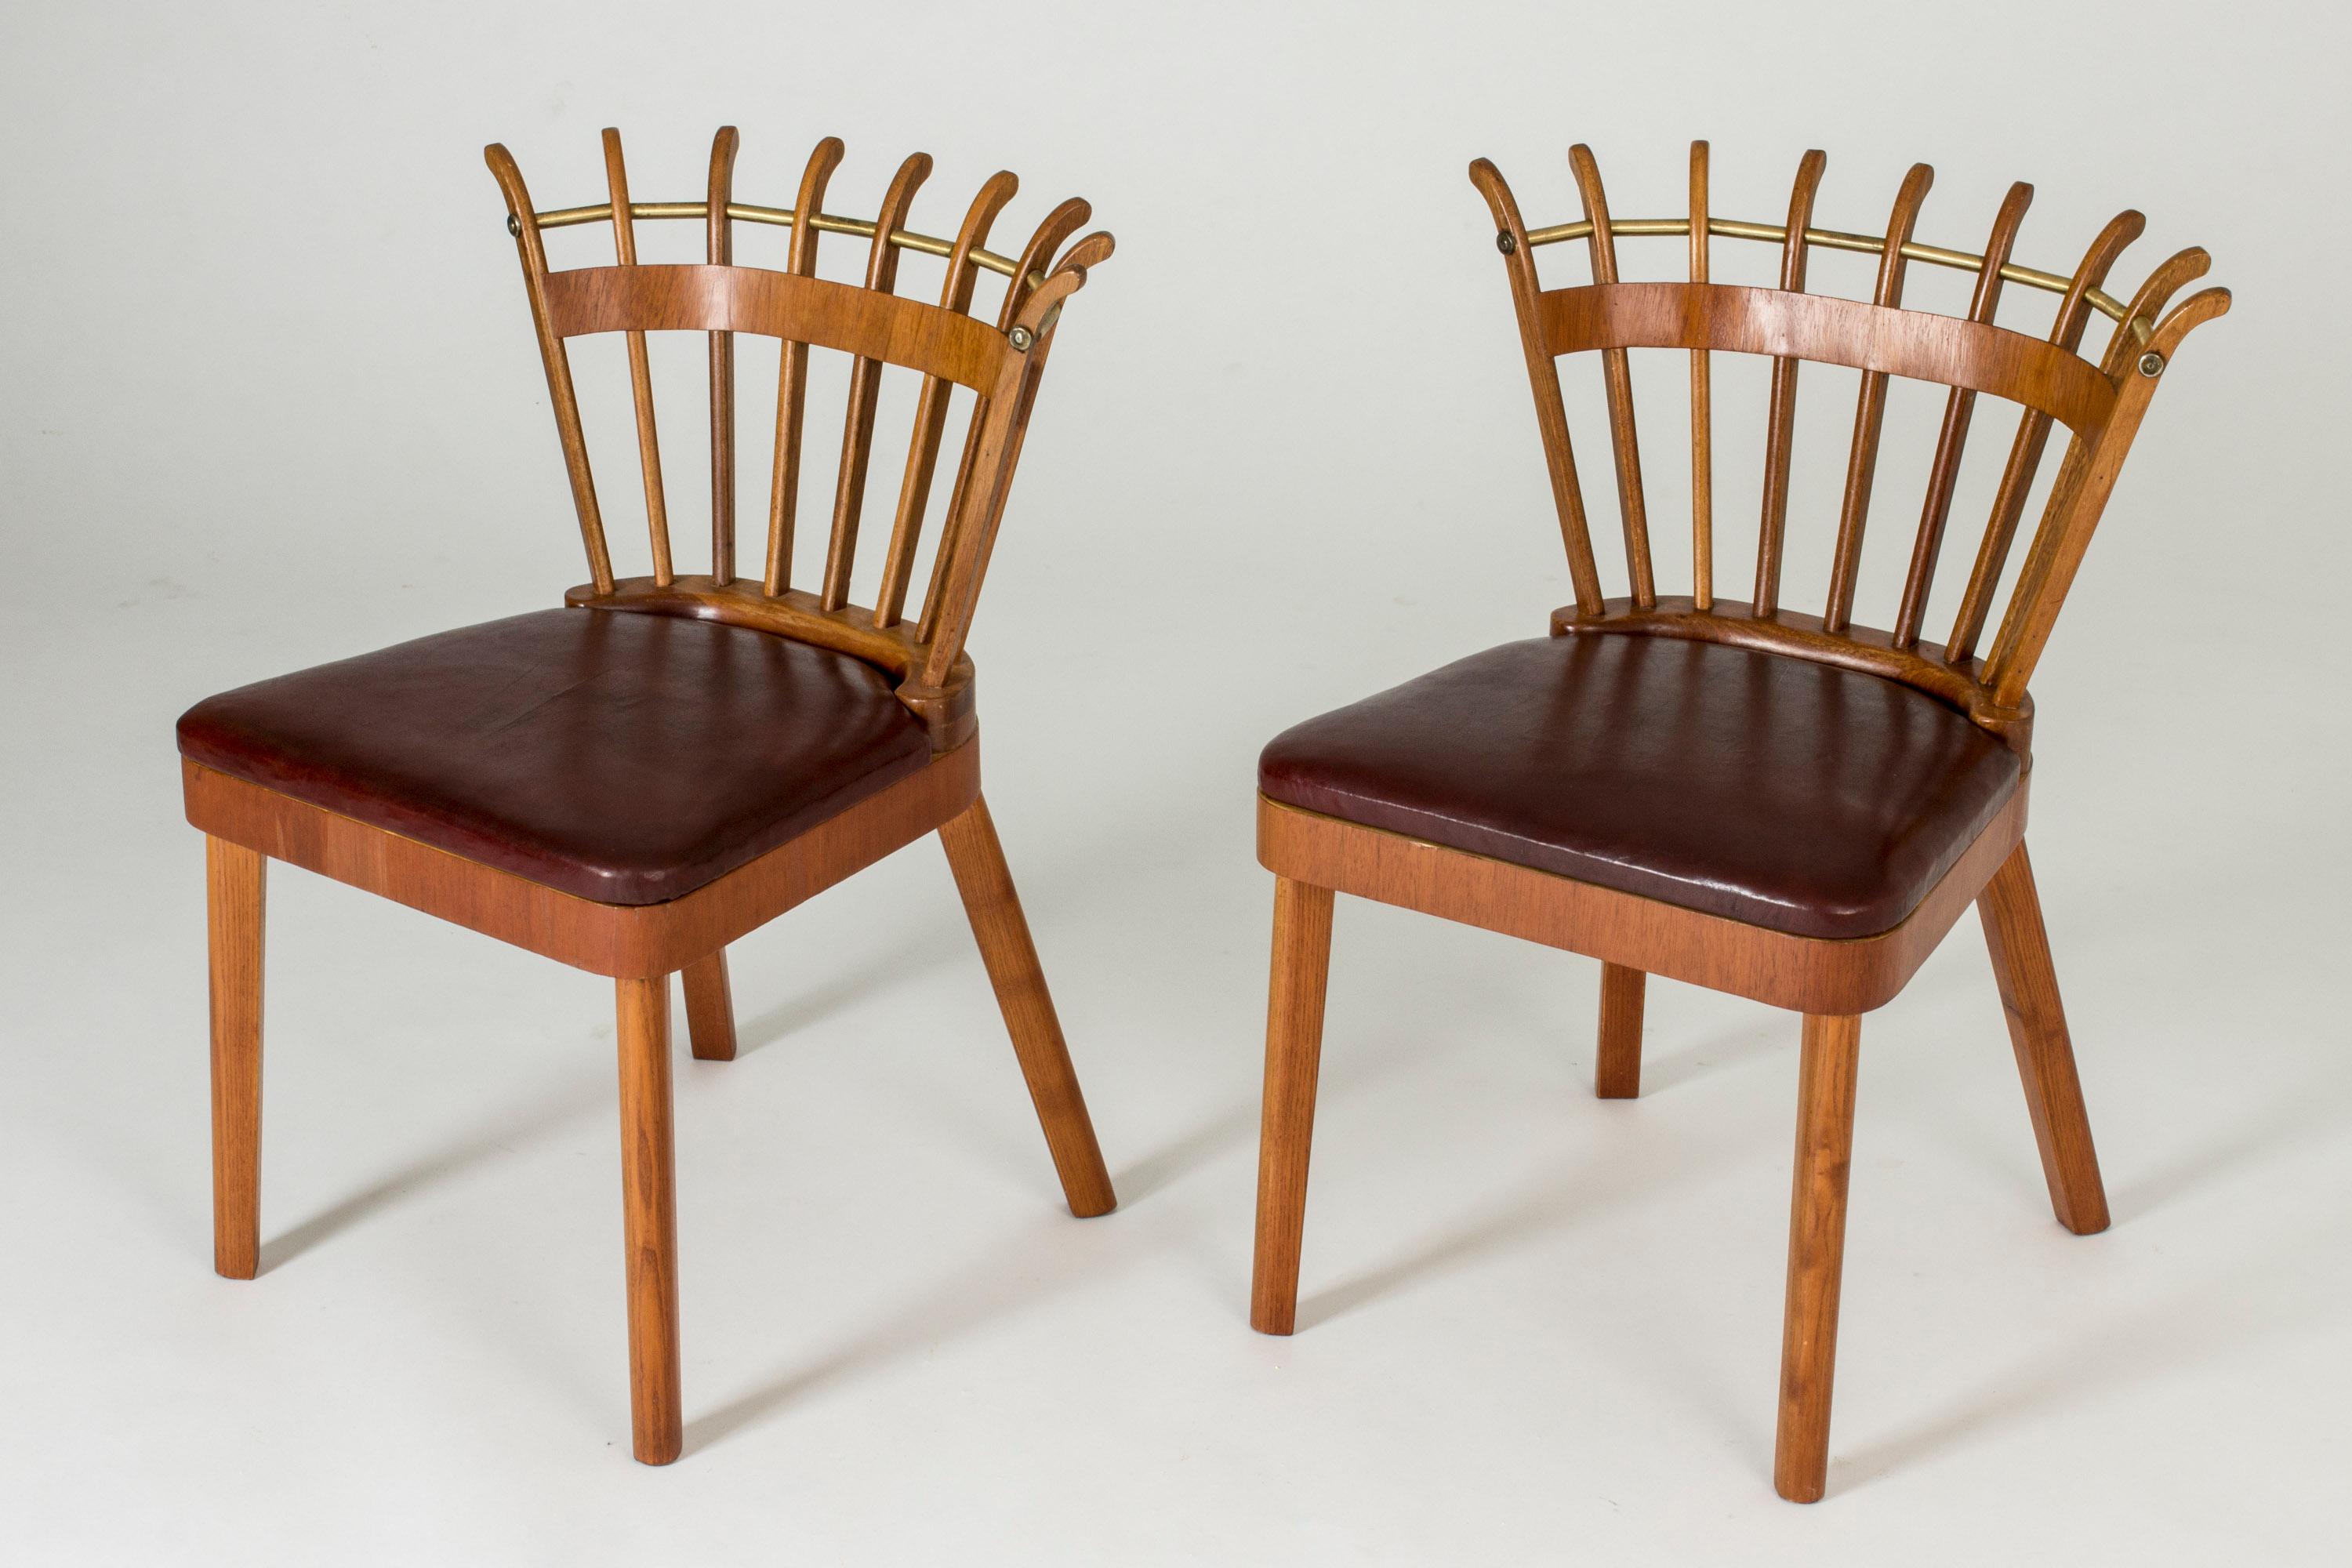 1946 chairs